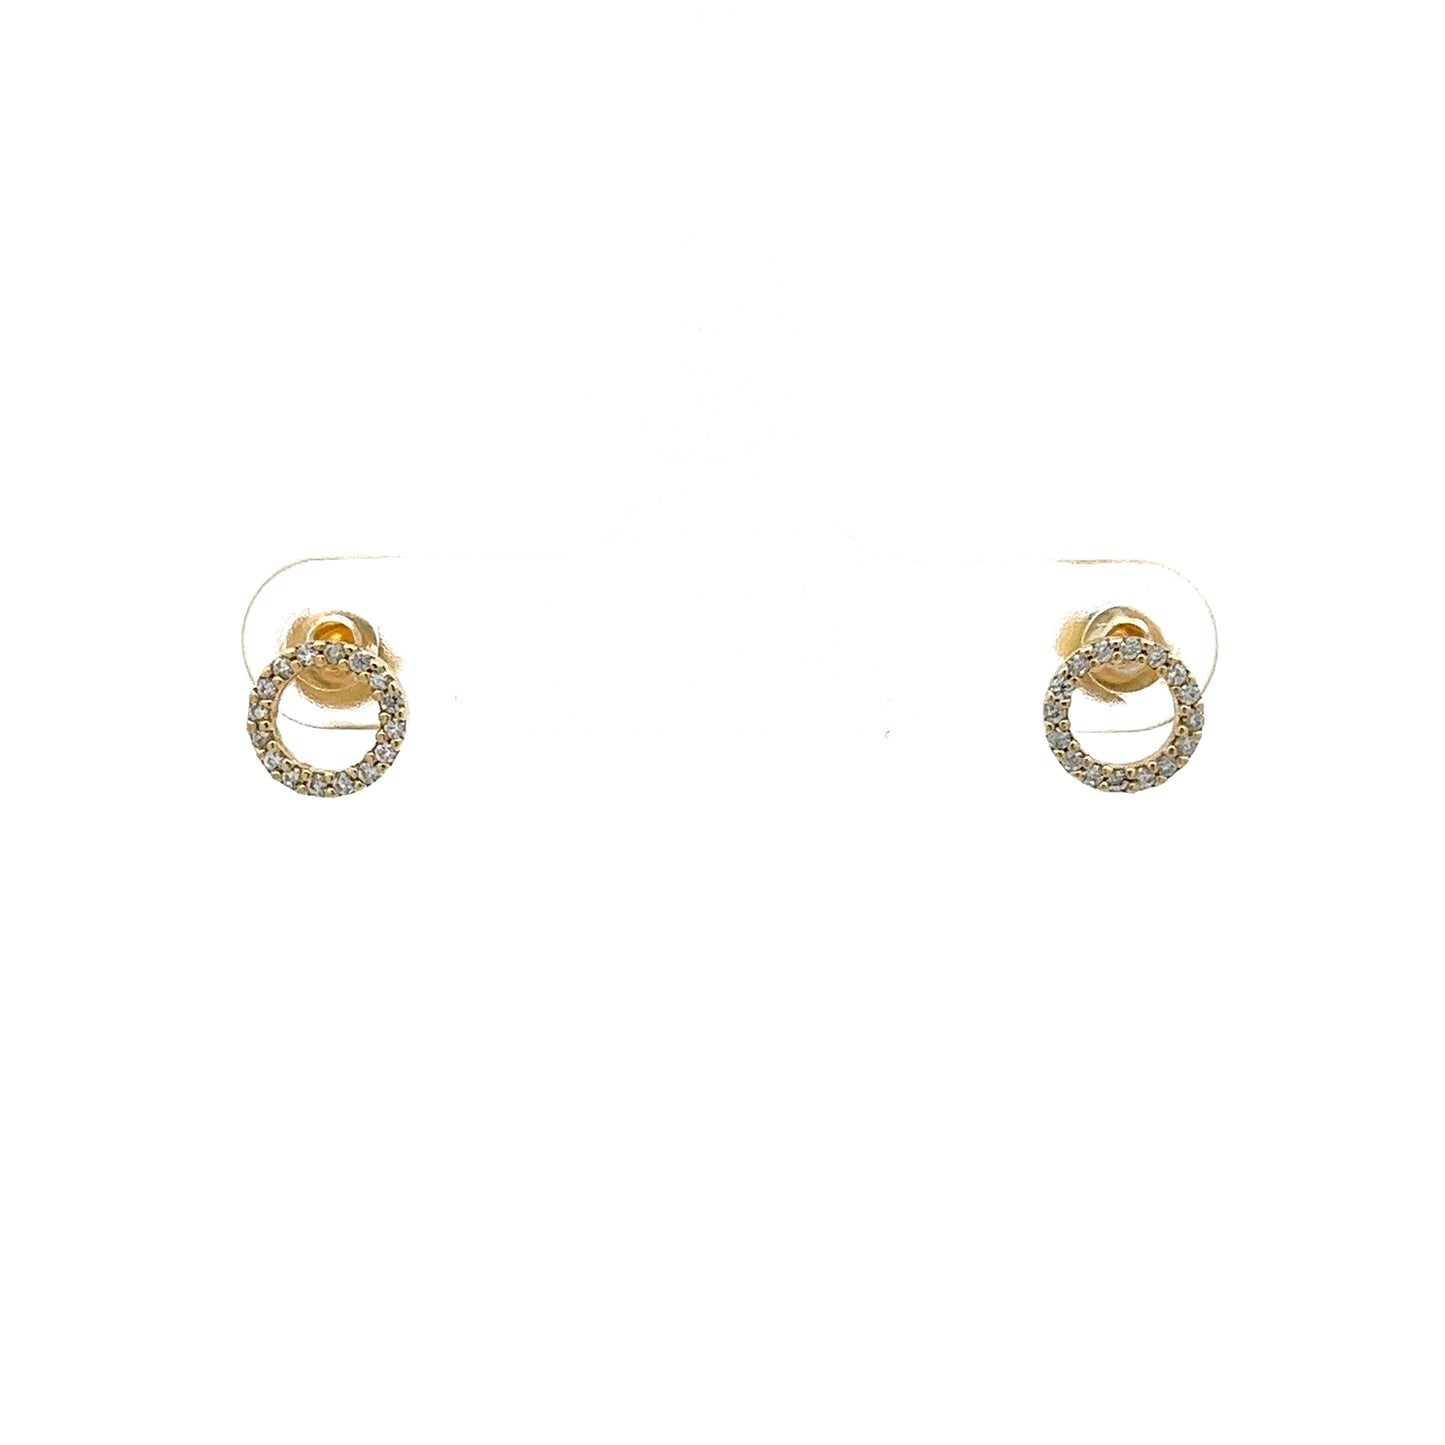 Big All Around The World Earrings in Gold